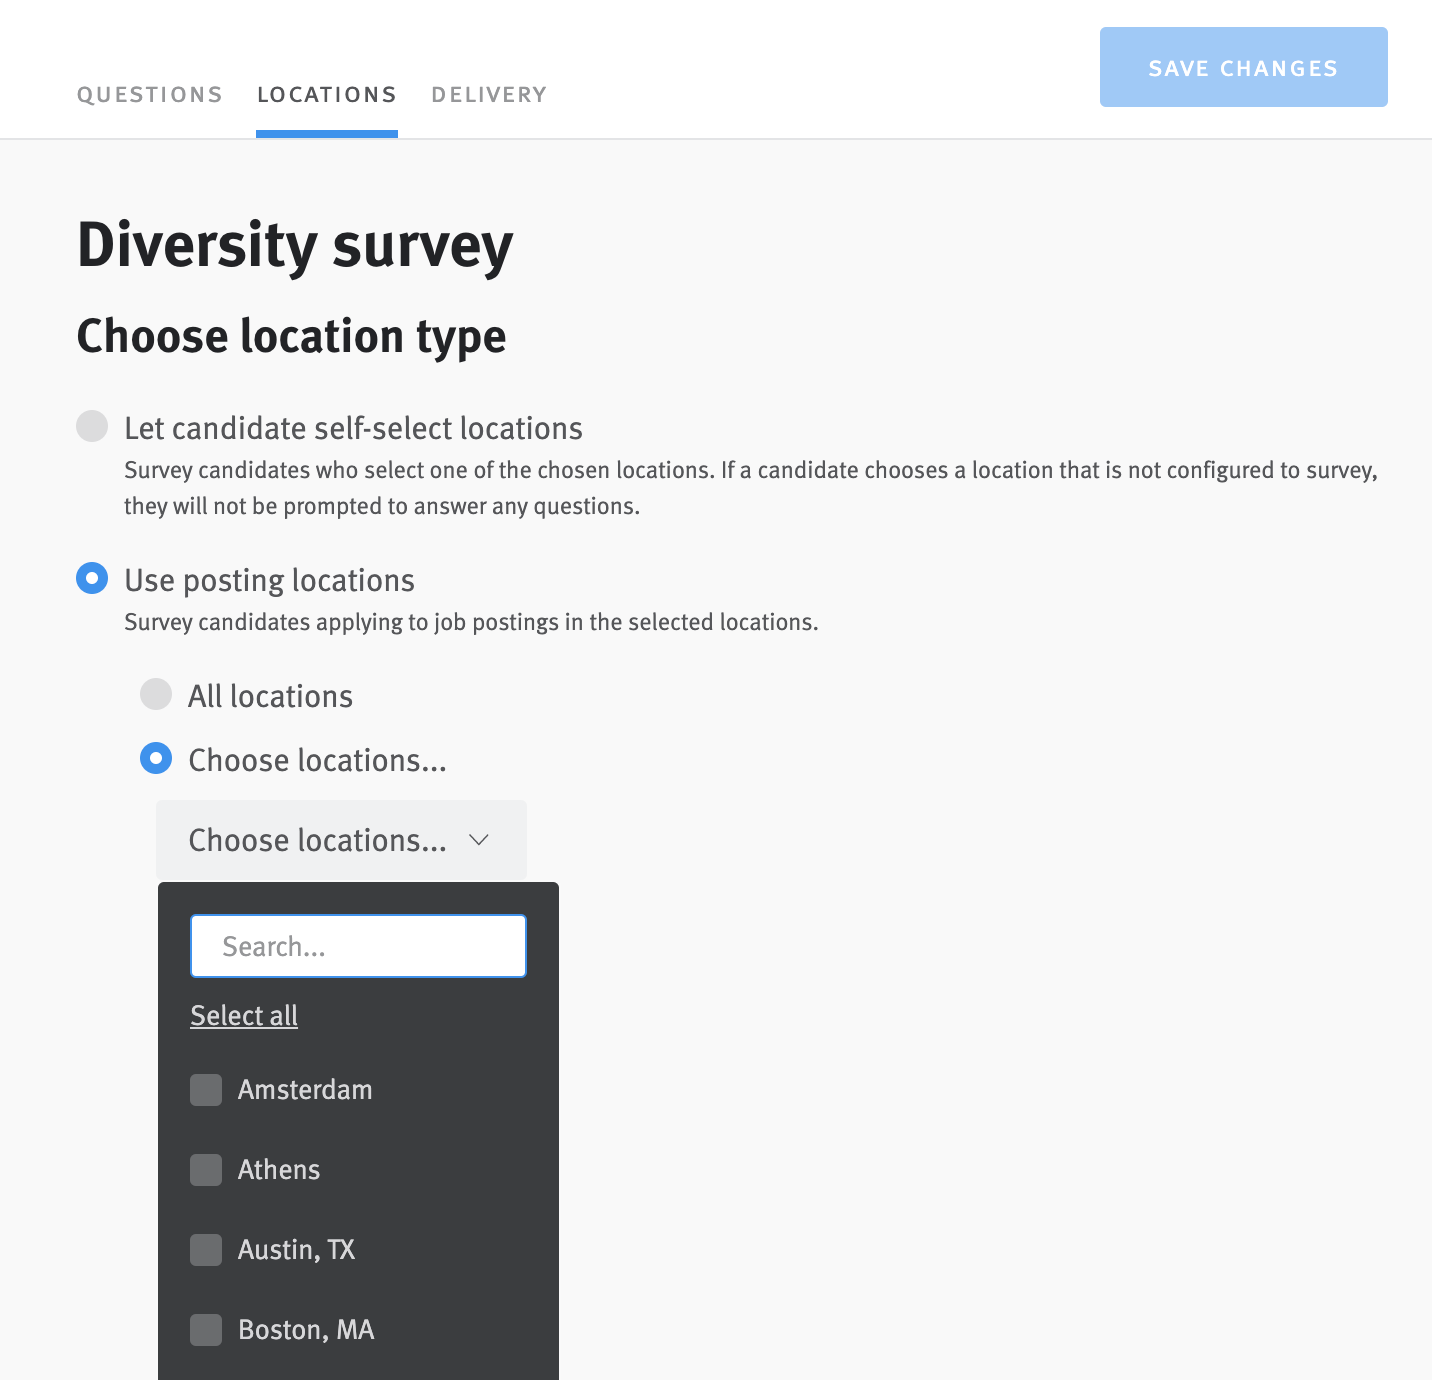 Diversity survey page with drop down menu of locations